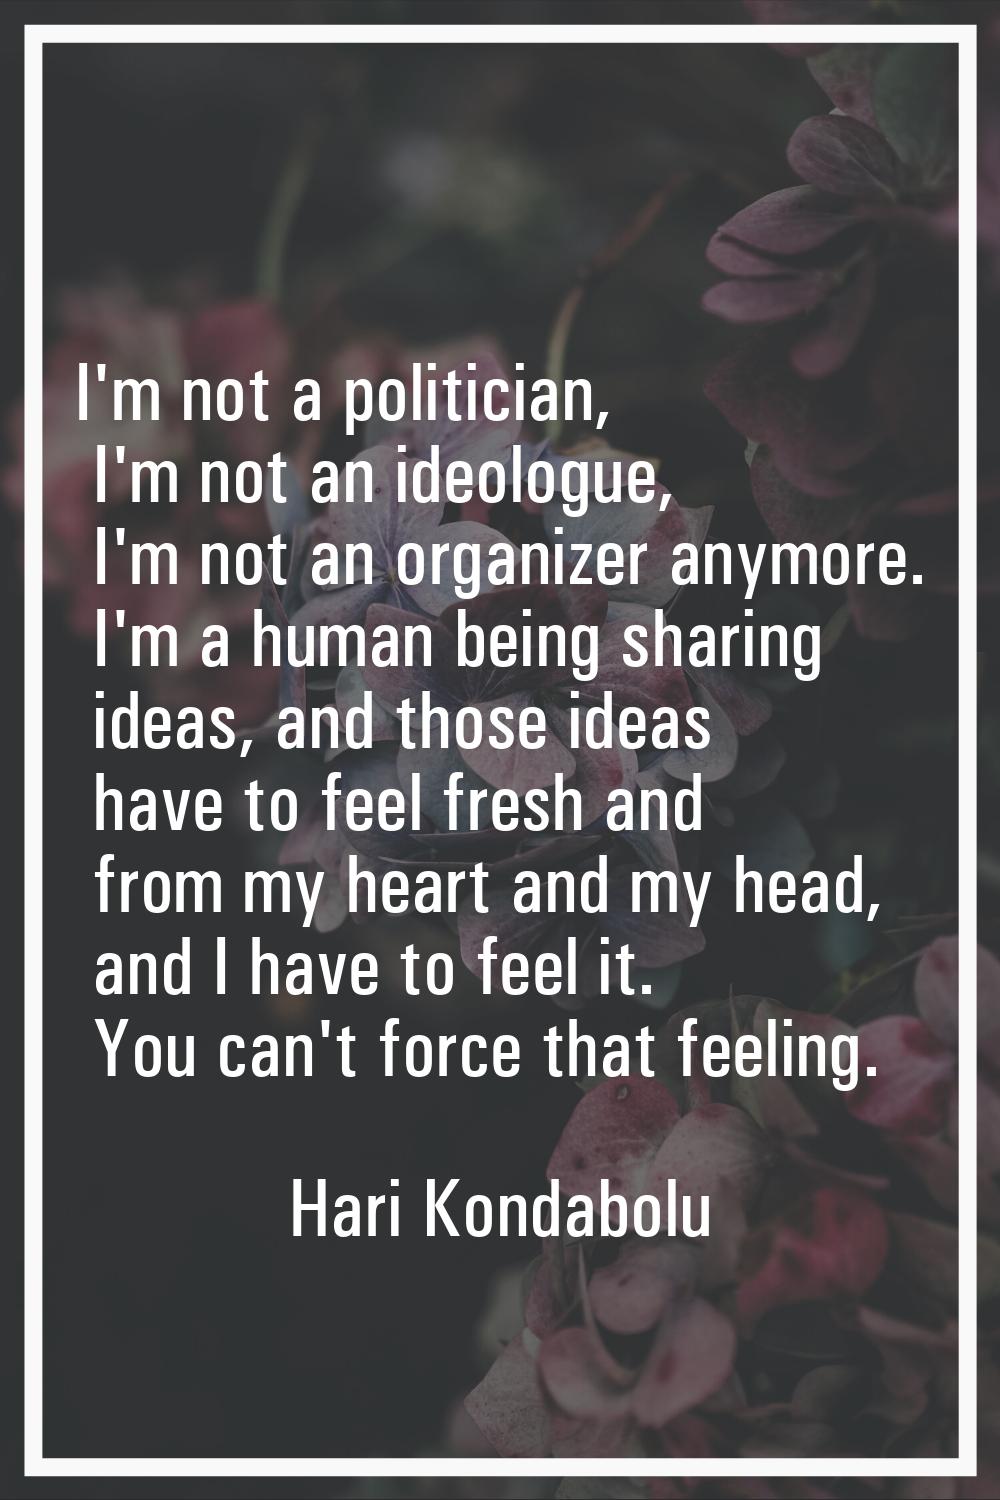 I'm not a politician, I'm not an ideologue, I'm not an organizer anymore. I'm a human being sharing